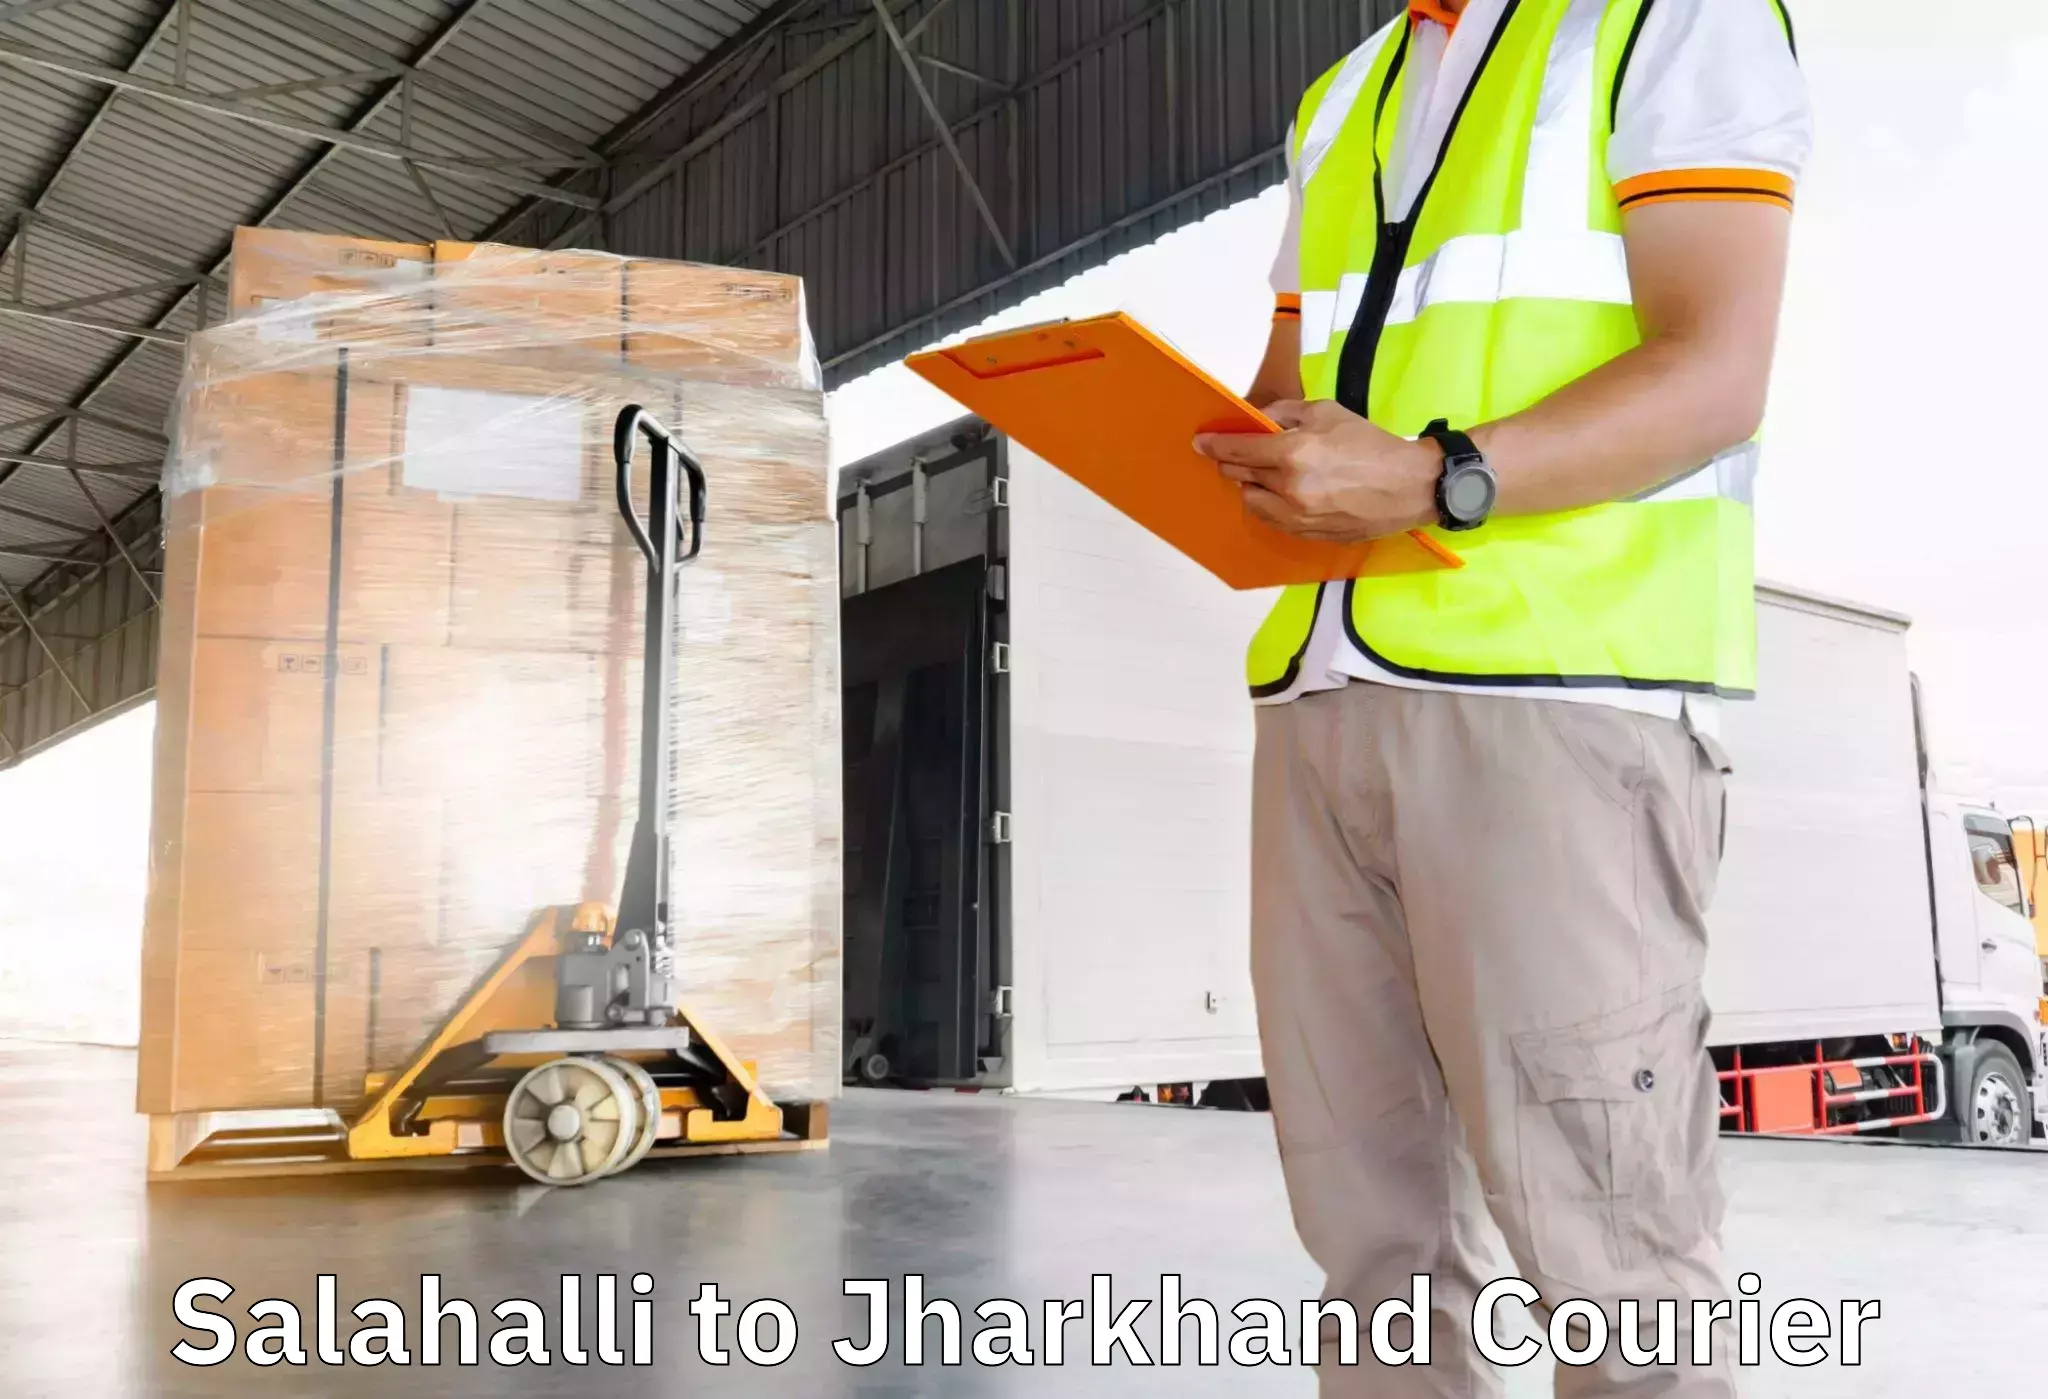 Moving and packing experts Salahalli to Domchanch